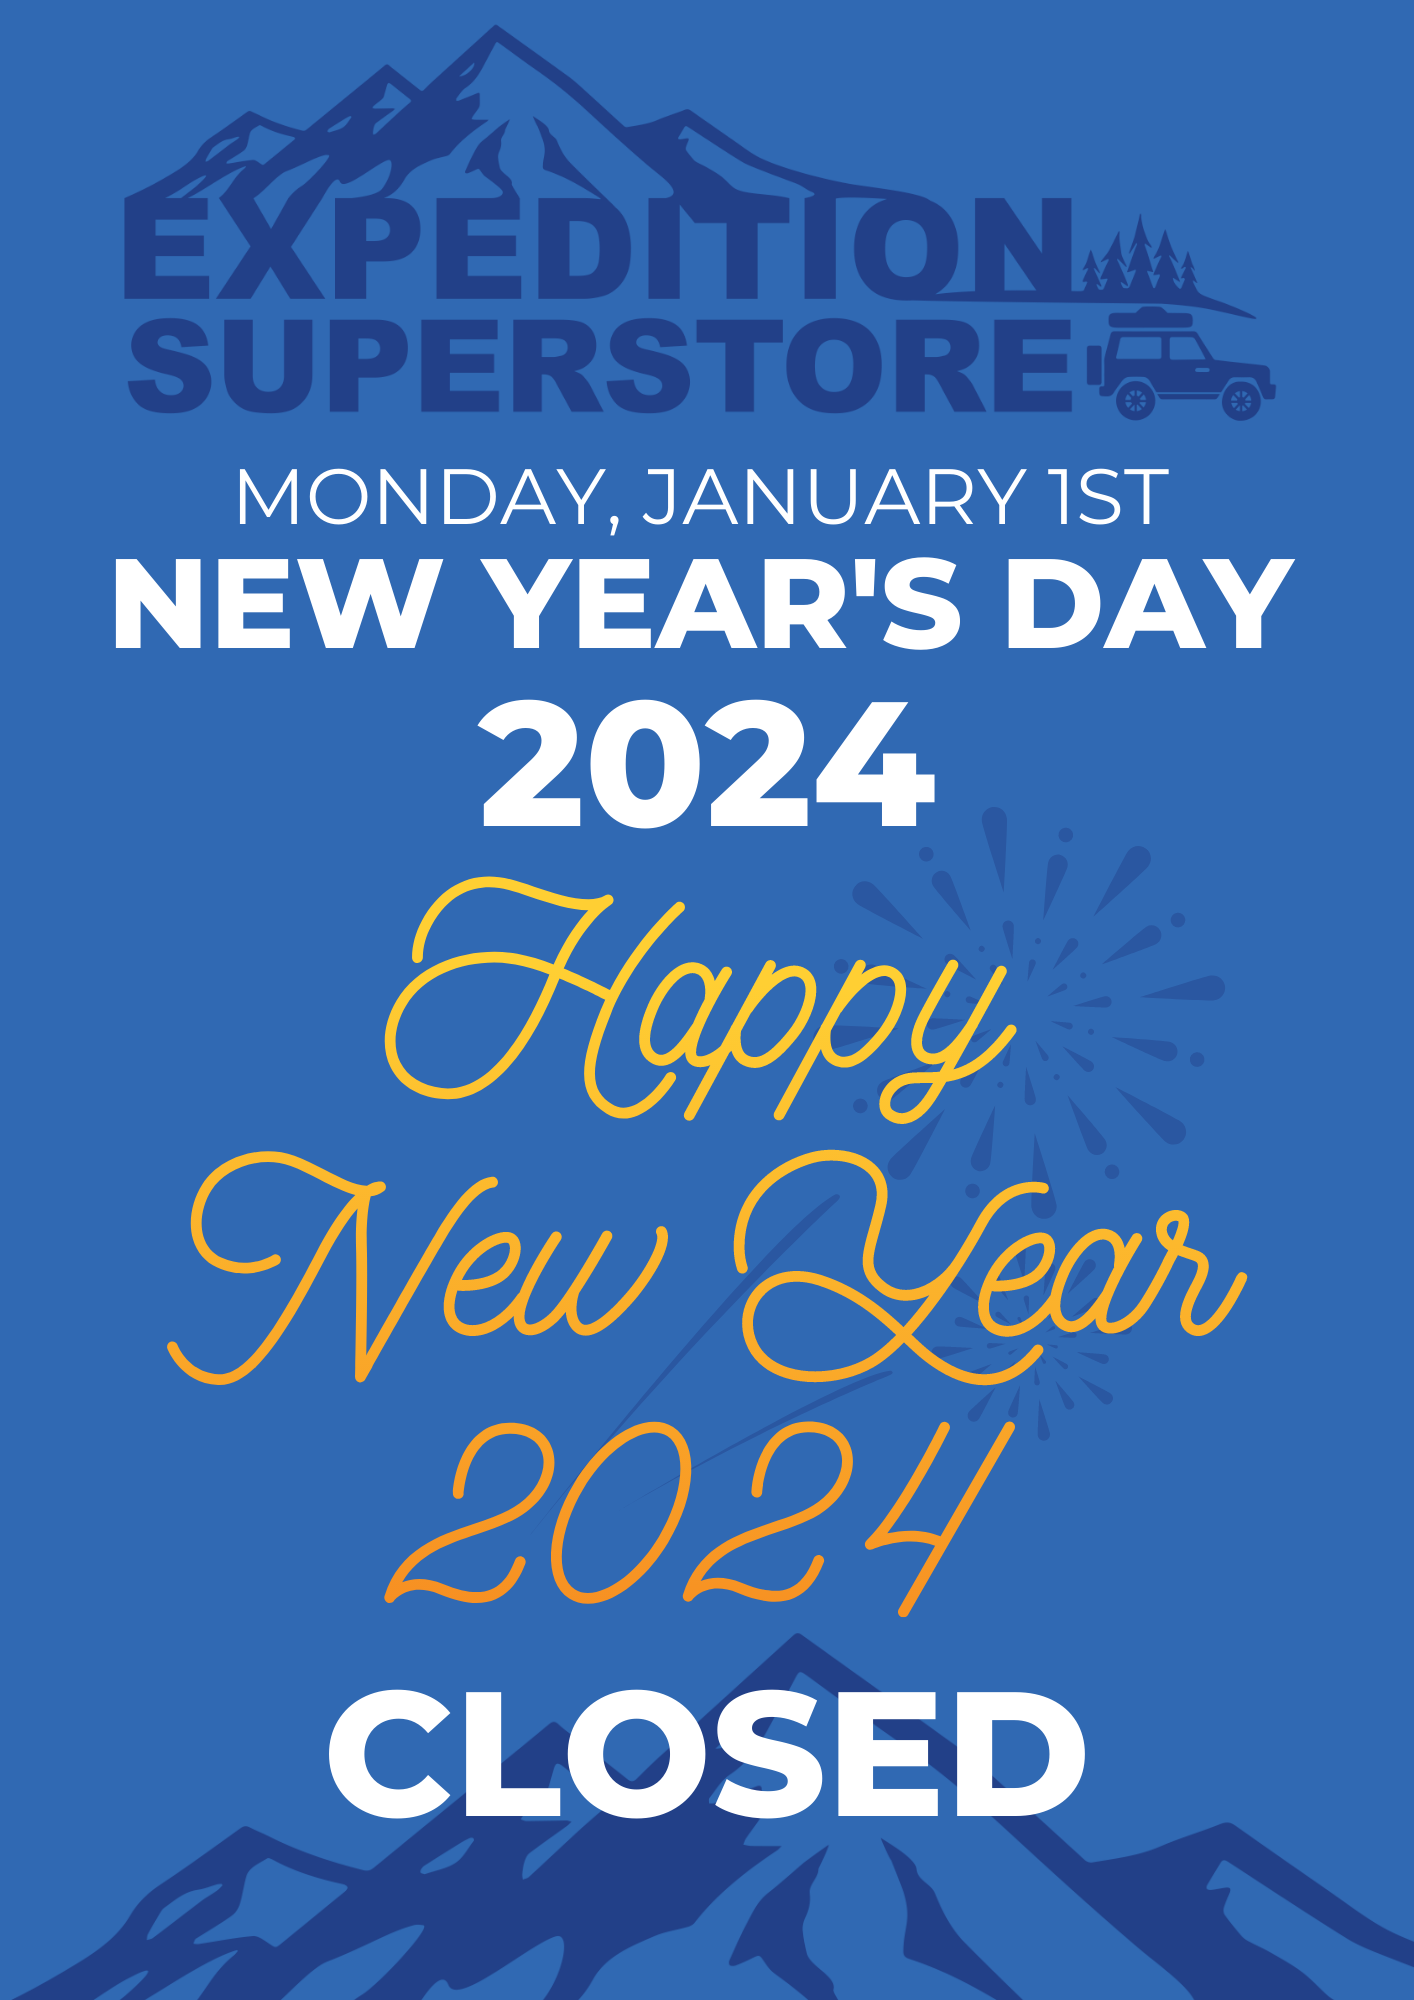 Closed New Year's Day 2024 Expedition Superstore